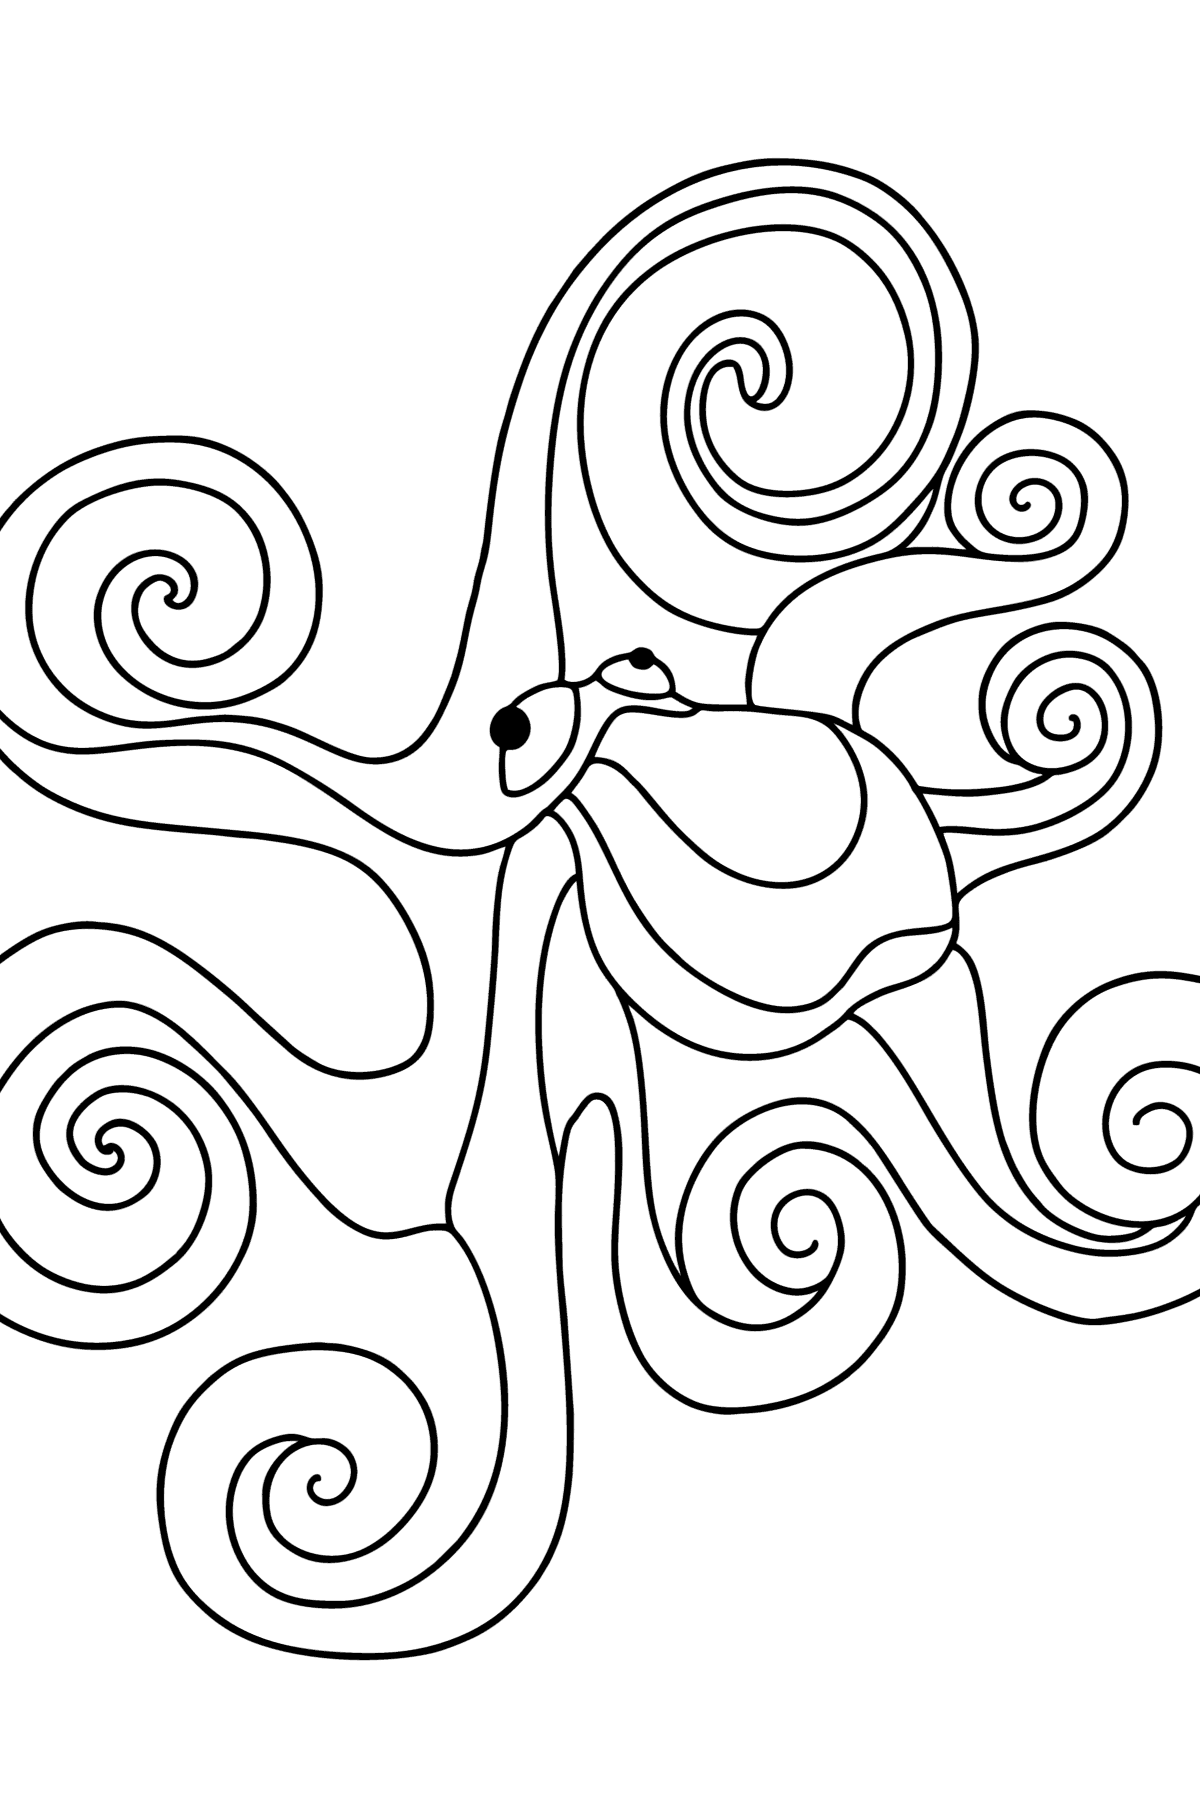 Common octopus coloring page - Coloring Pages for Kids